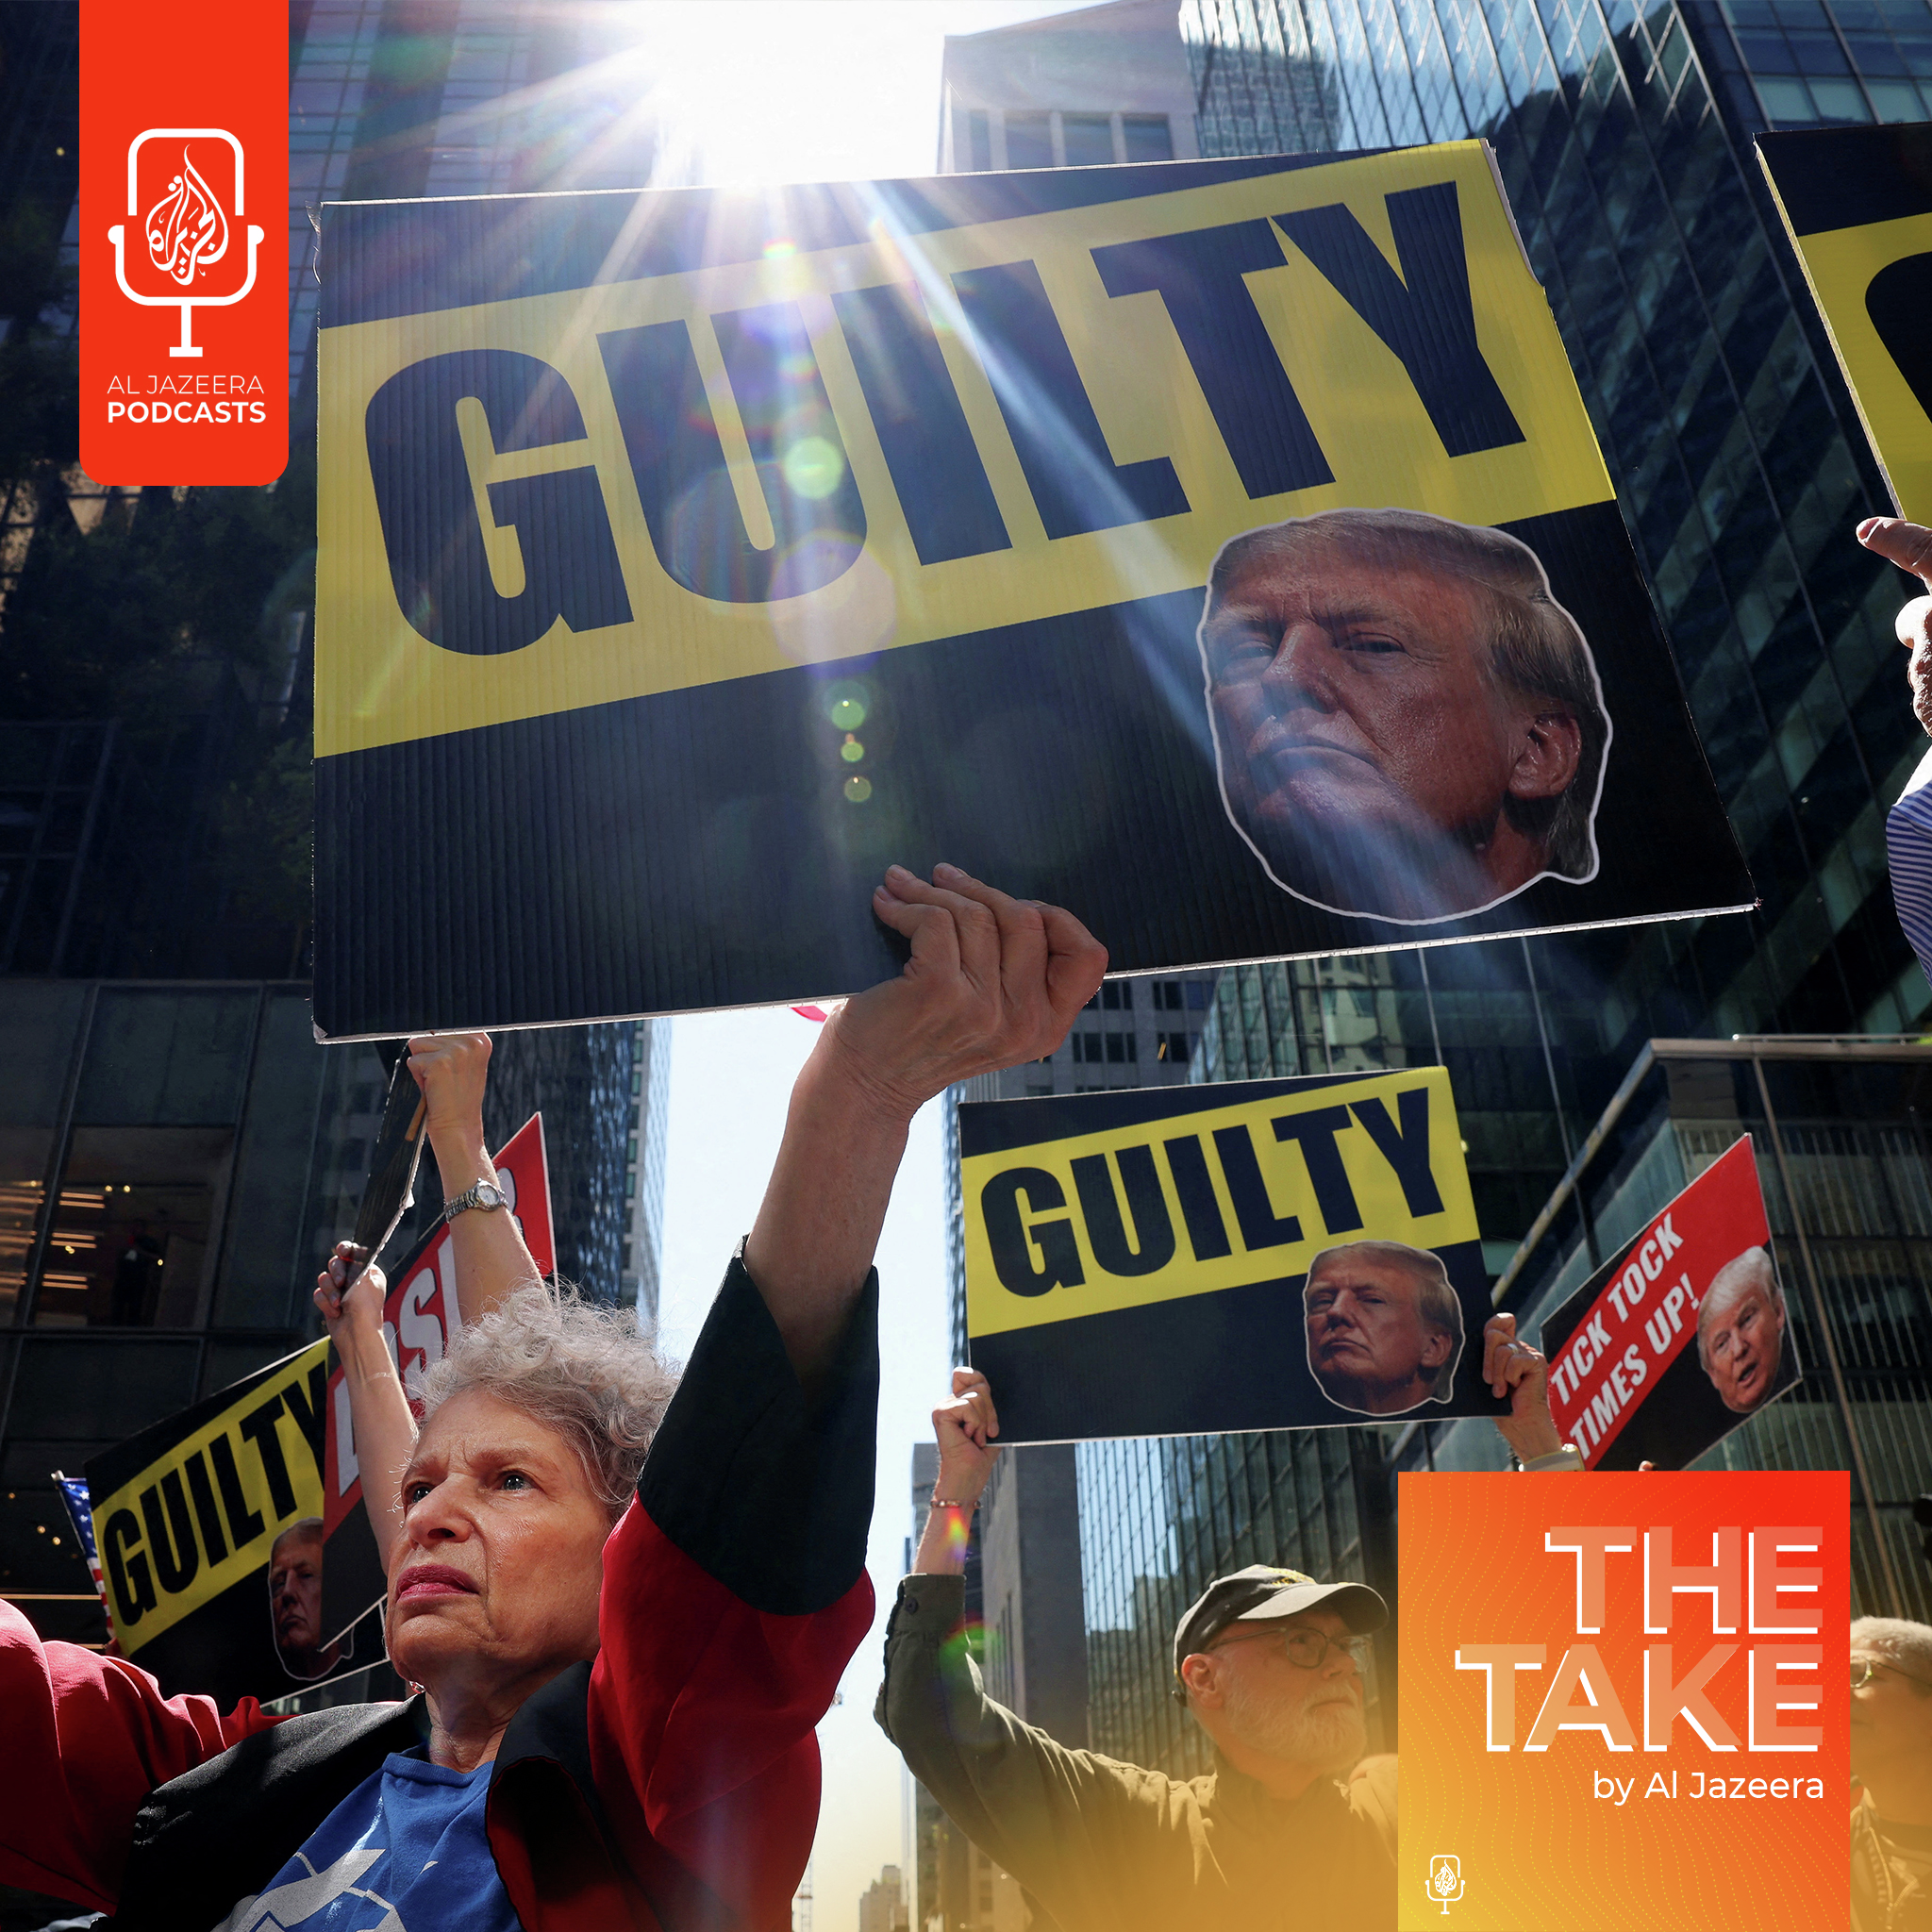 Can Trump become president with a criminal conviction?